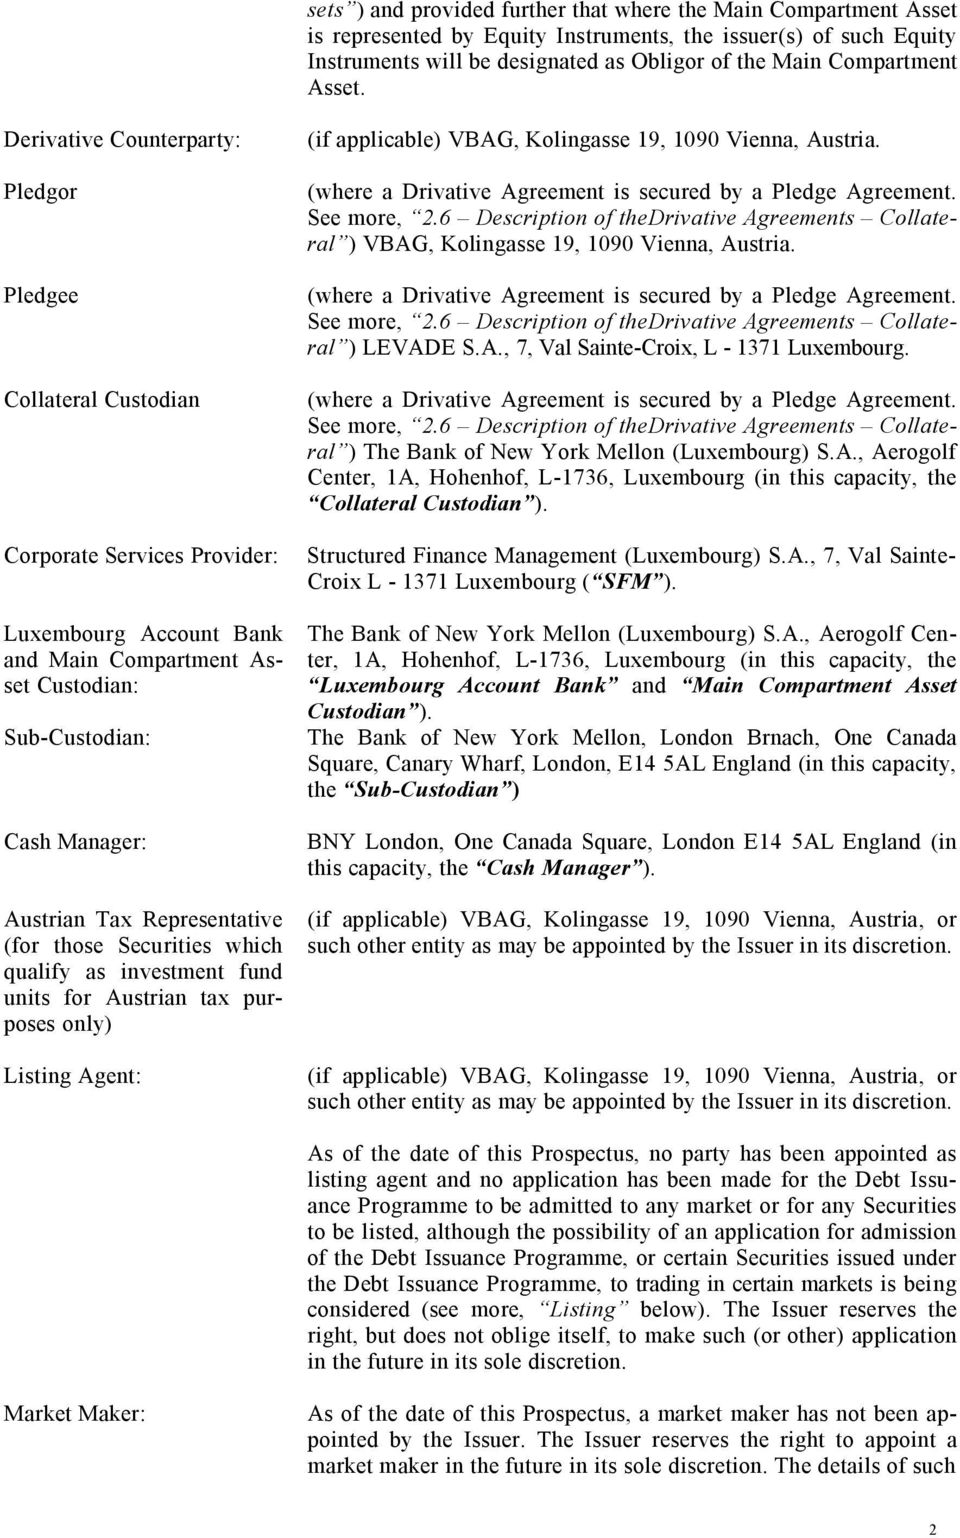 Derivative Counterparty: Pledgor Pledgee Collateral Custodian Corporate Services Provider: Luxembourg Account Bank and Main Compartment Asset Custodian: Sub-Custodian: Cash Manager: Austrian Tax